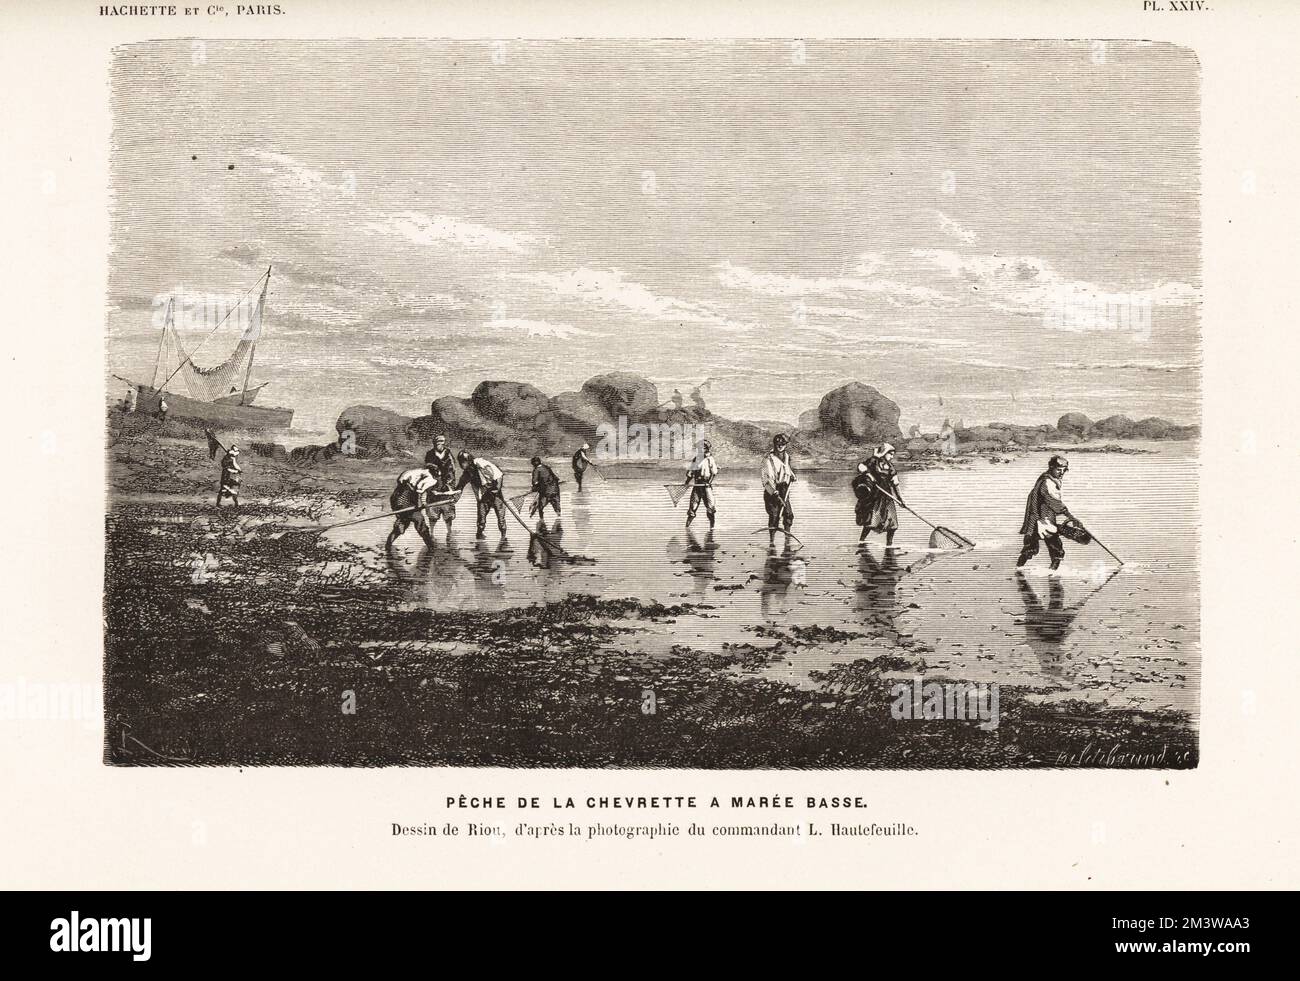 Shrimpers fishing for shrimps with nets at low tide. Peche de la chevrette a Maree Basse. Drawing by Edouard Riou after a photograph by L. Hautefeuille. Woodcut by Henri Hildibrand from Alfred Fredol’s Le Monde de la Mer, the World of the Sea, edited by Olivier Fredol, Librairie Hachette et. Cie., Paris, 1881. Alfred Fredol was the pseudonym of French zoologist and botanist Alfred Moquin-Tandon, 1804-1863. Stock Photo